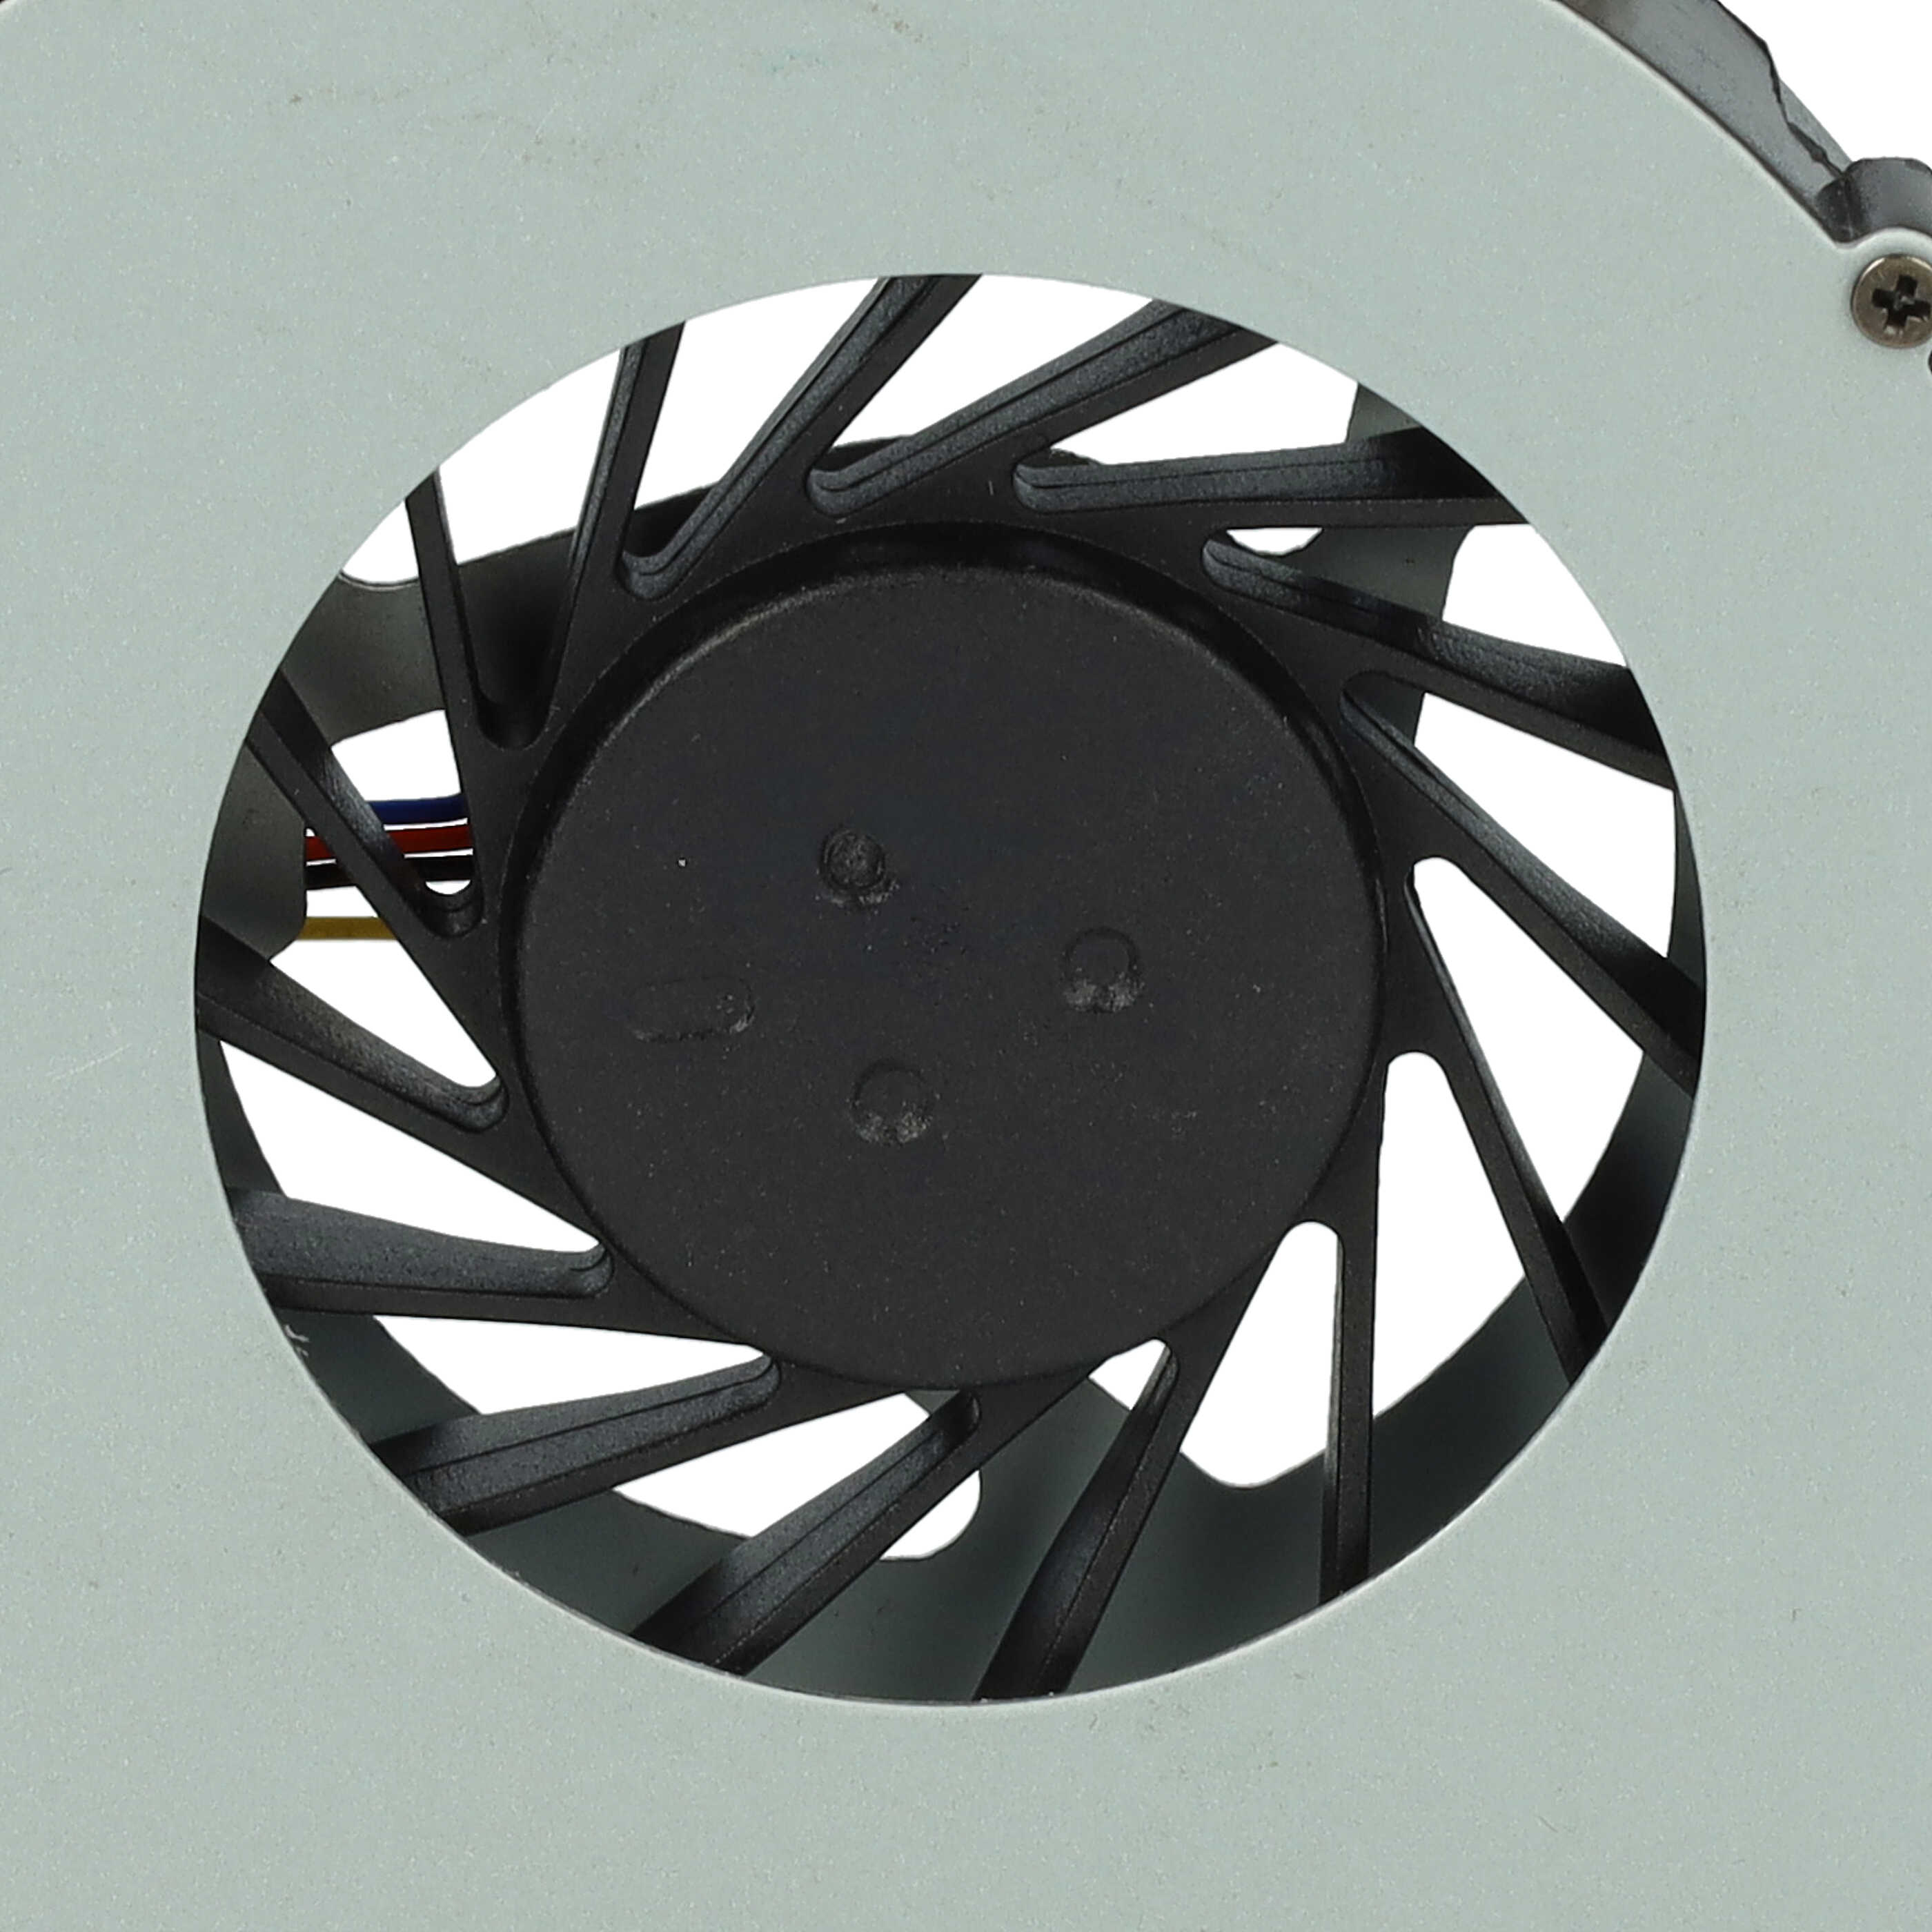 CPU / GPU Fan suitable for IBM / Lenovo IdeaPad G580, G585 Notebook 79 x 66 x 13 mm